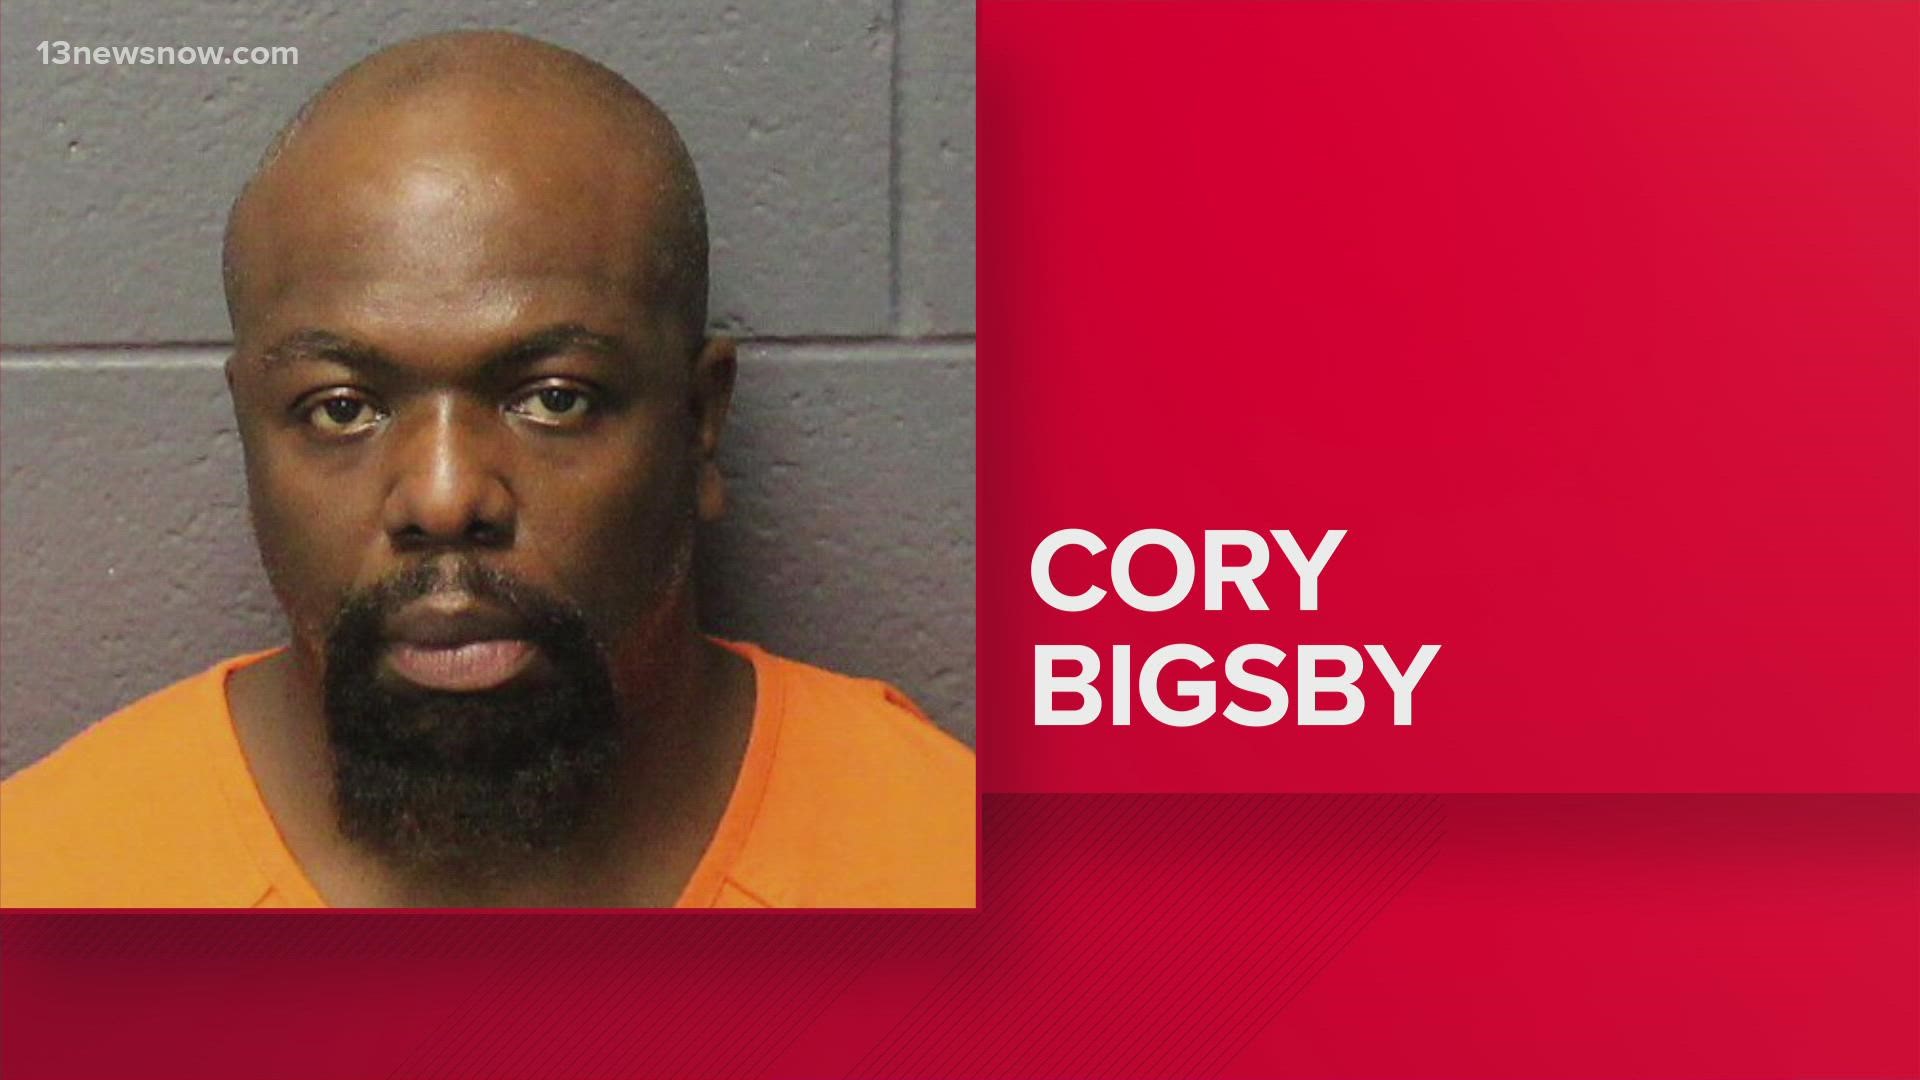 A bond hearing for Bigsby, scheduled for Friday, won't happen. His attorney asked for more time to review videos of Bigsby's interviews at police headquarters.